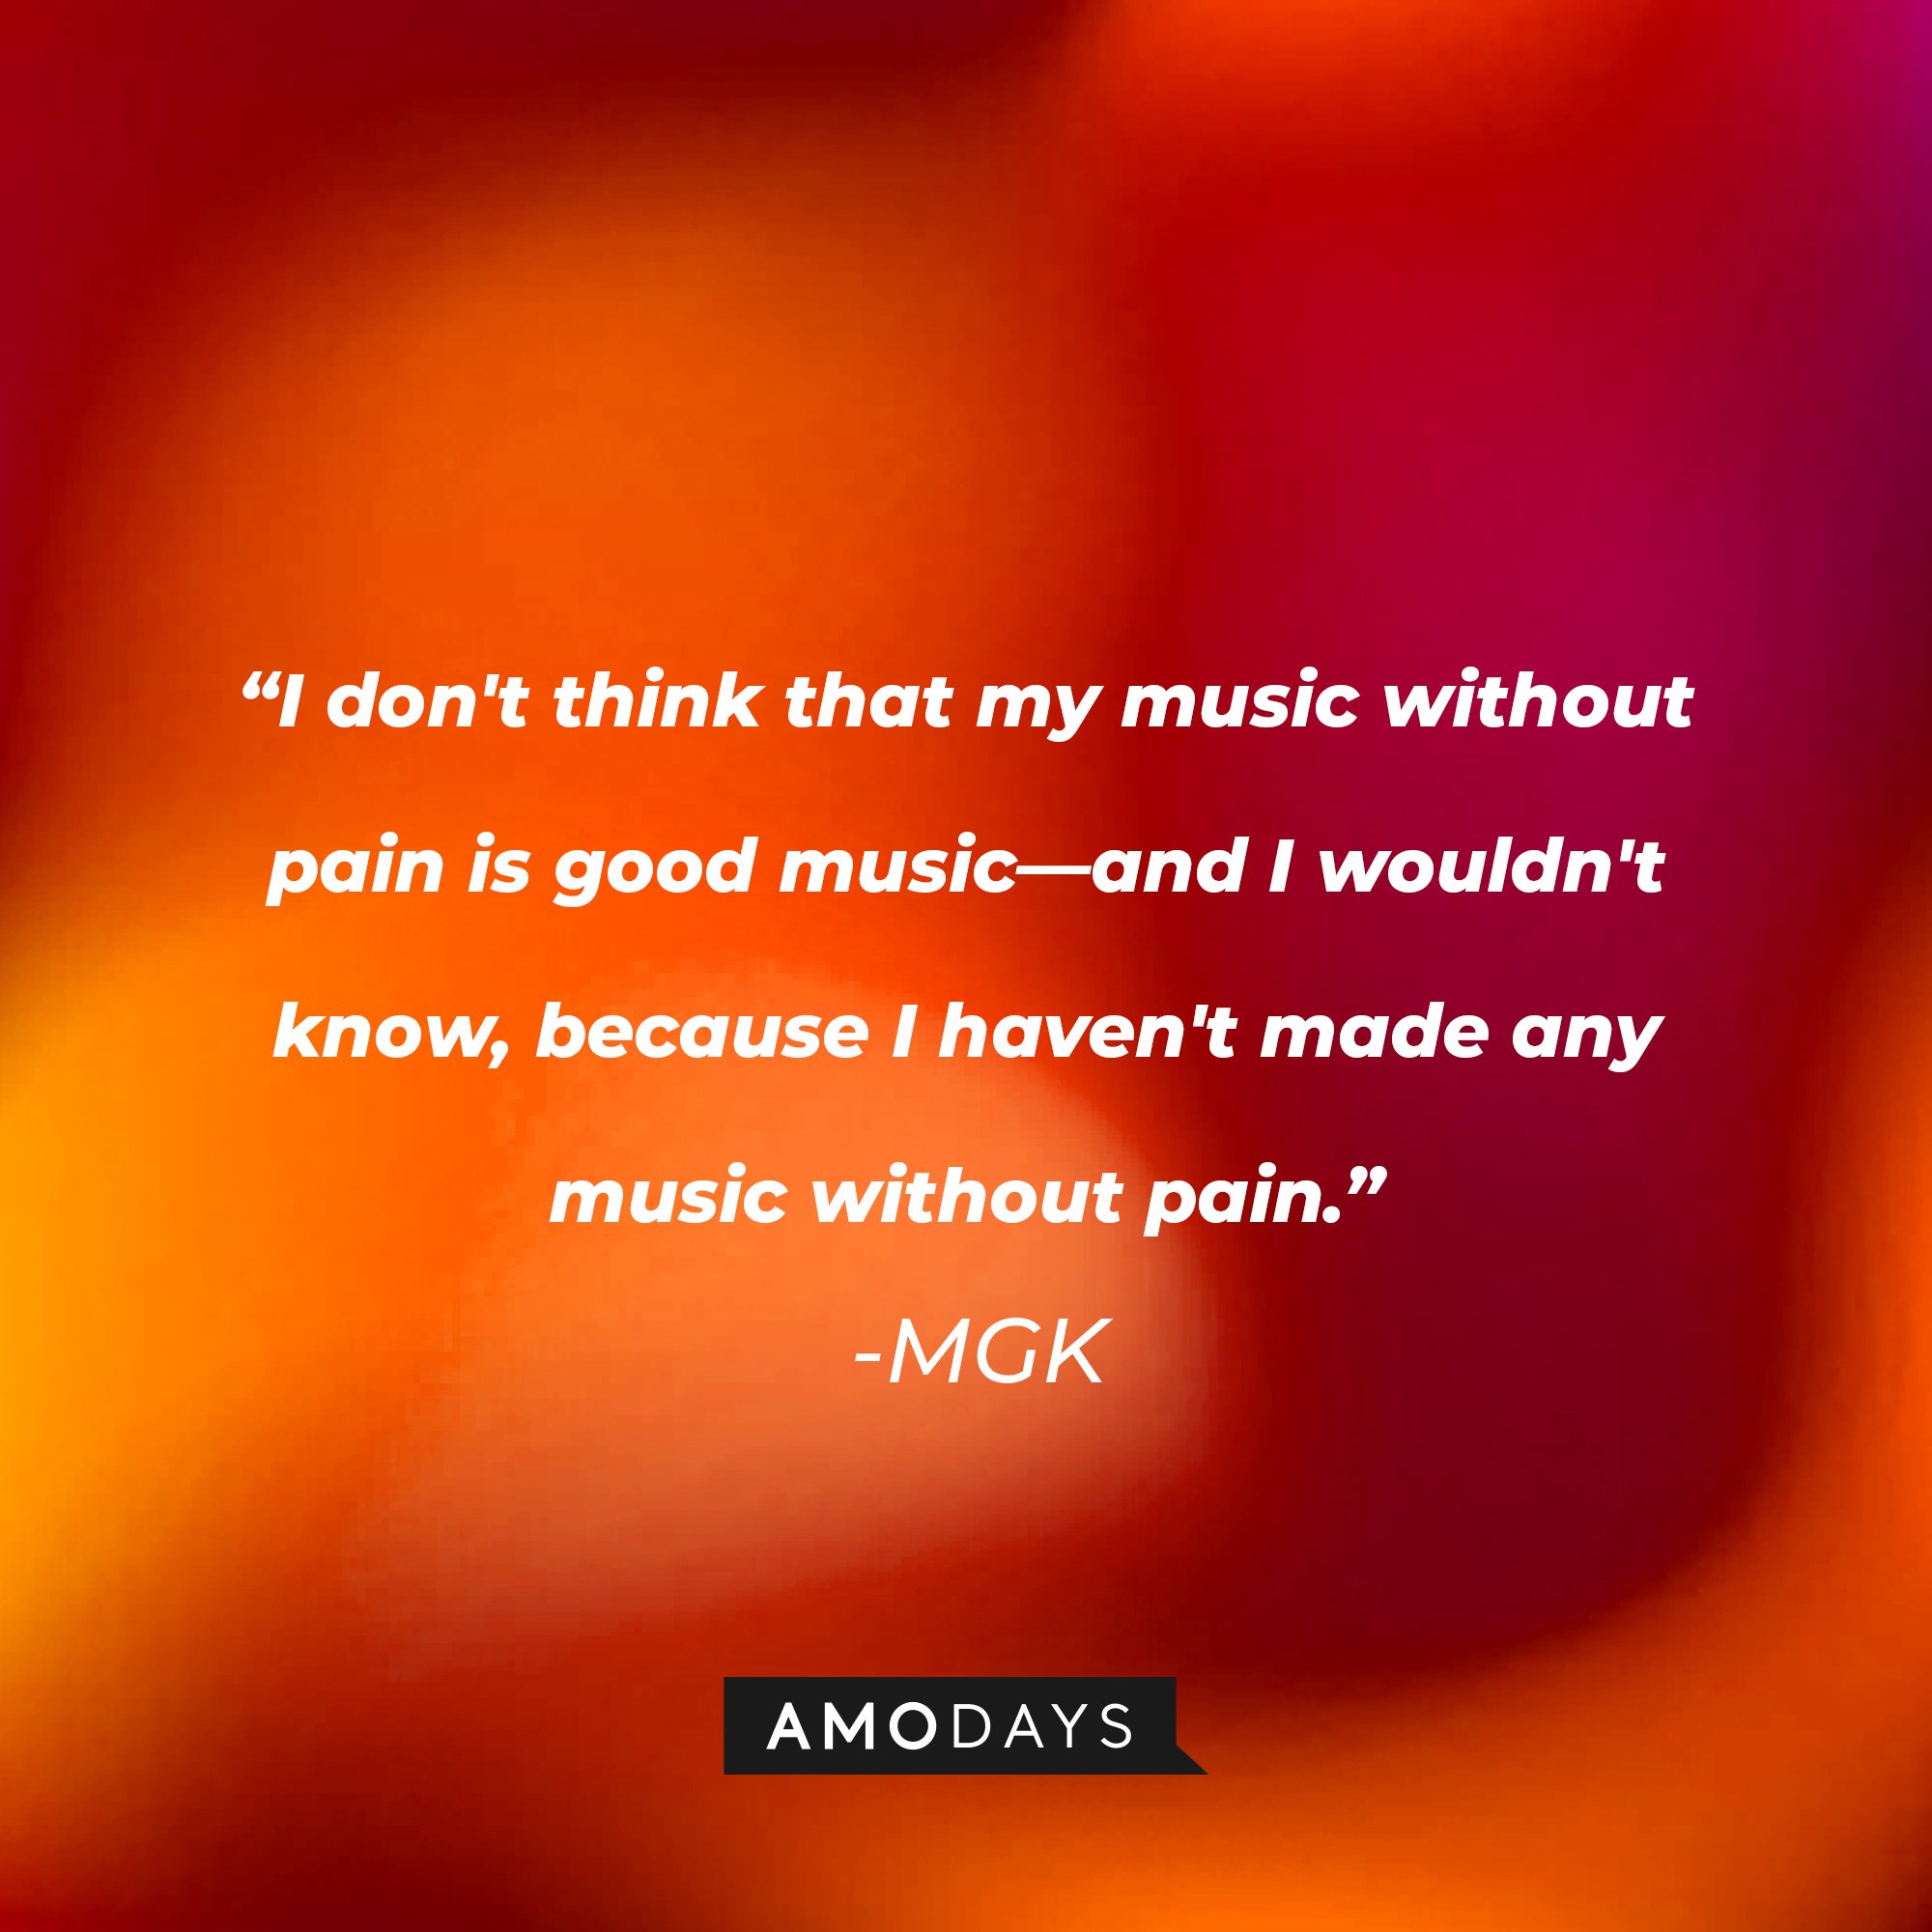 MGK's quote: "I don't think that my music without pain is good music—and I wouldn't know, because I haven't made any music without pain." | Image: AmoDays